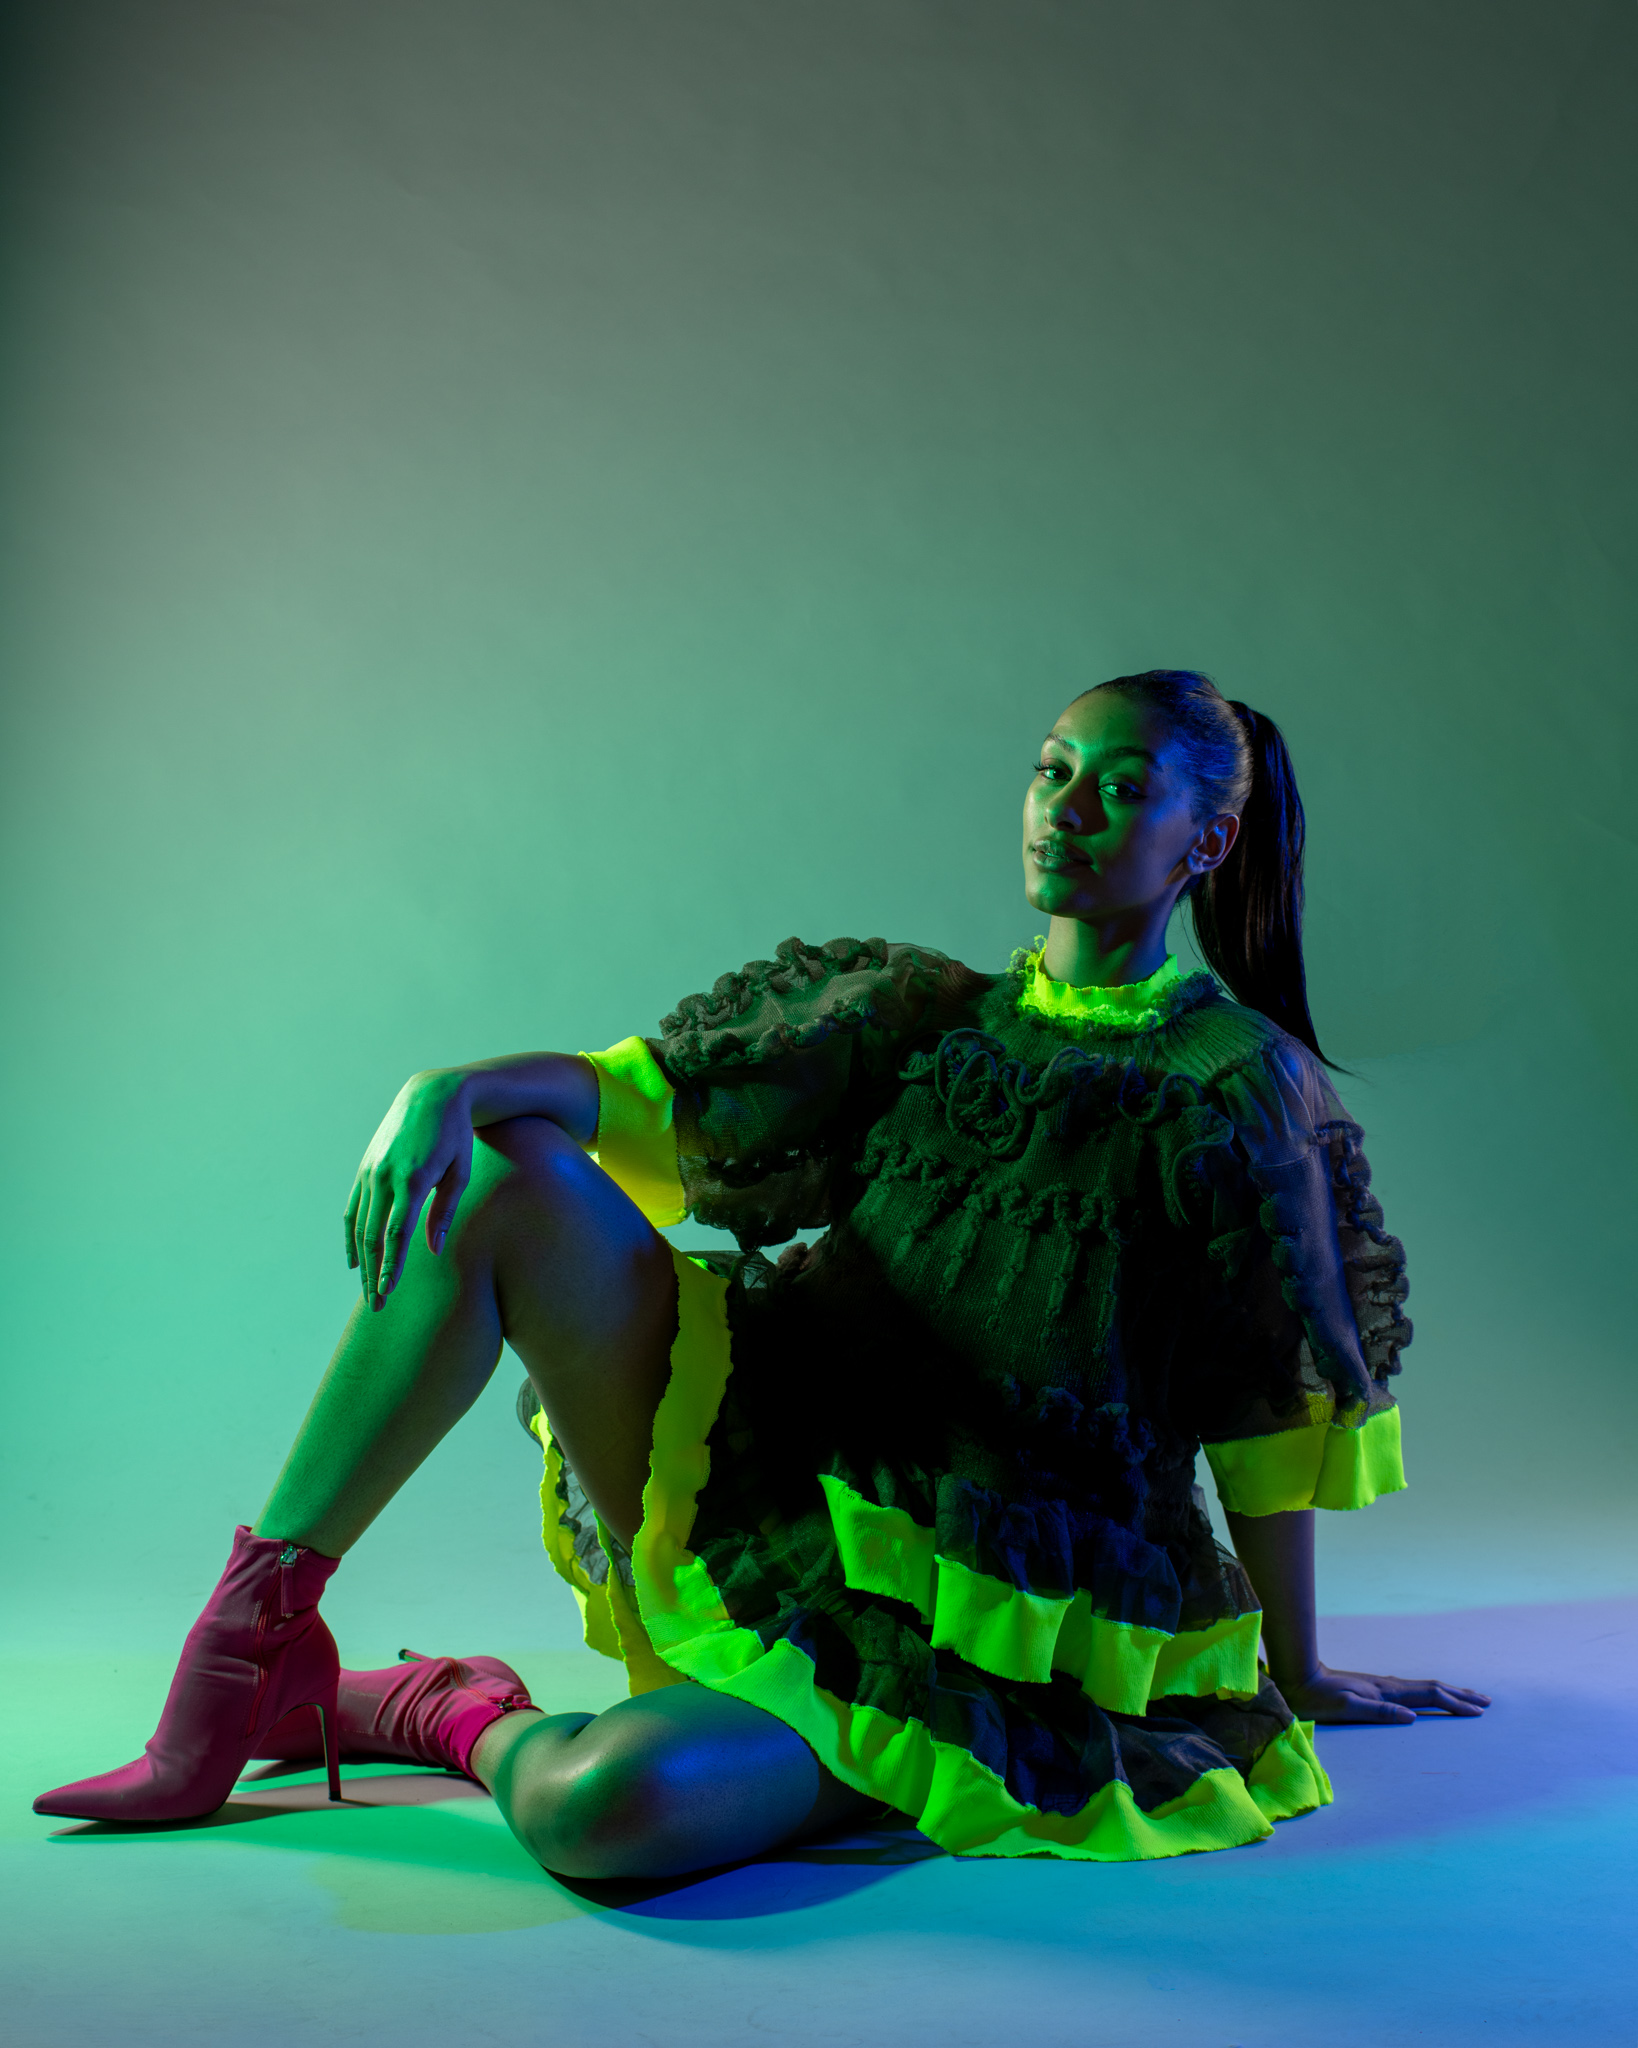 Fashion model posing on the ground with knee raised up. Green lighting. Showcasing one of the garments from Veiling Veronicas series.